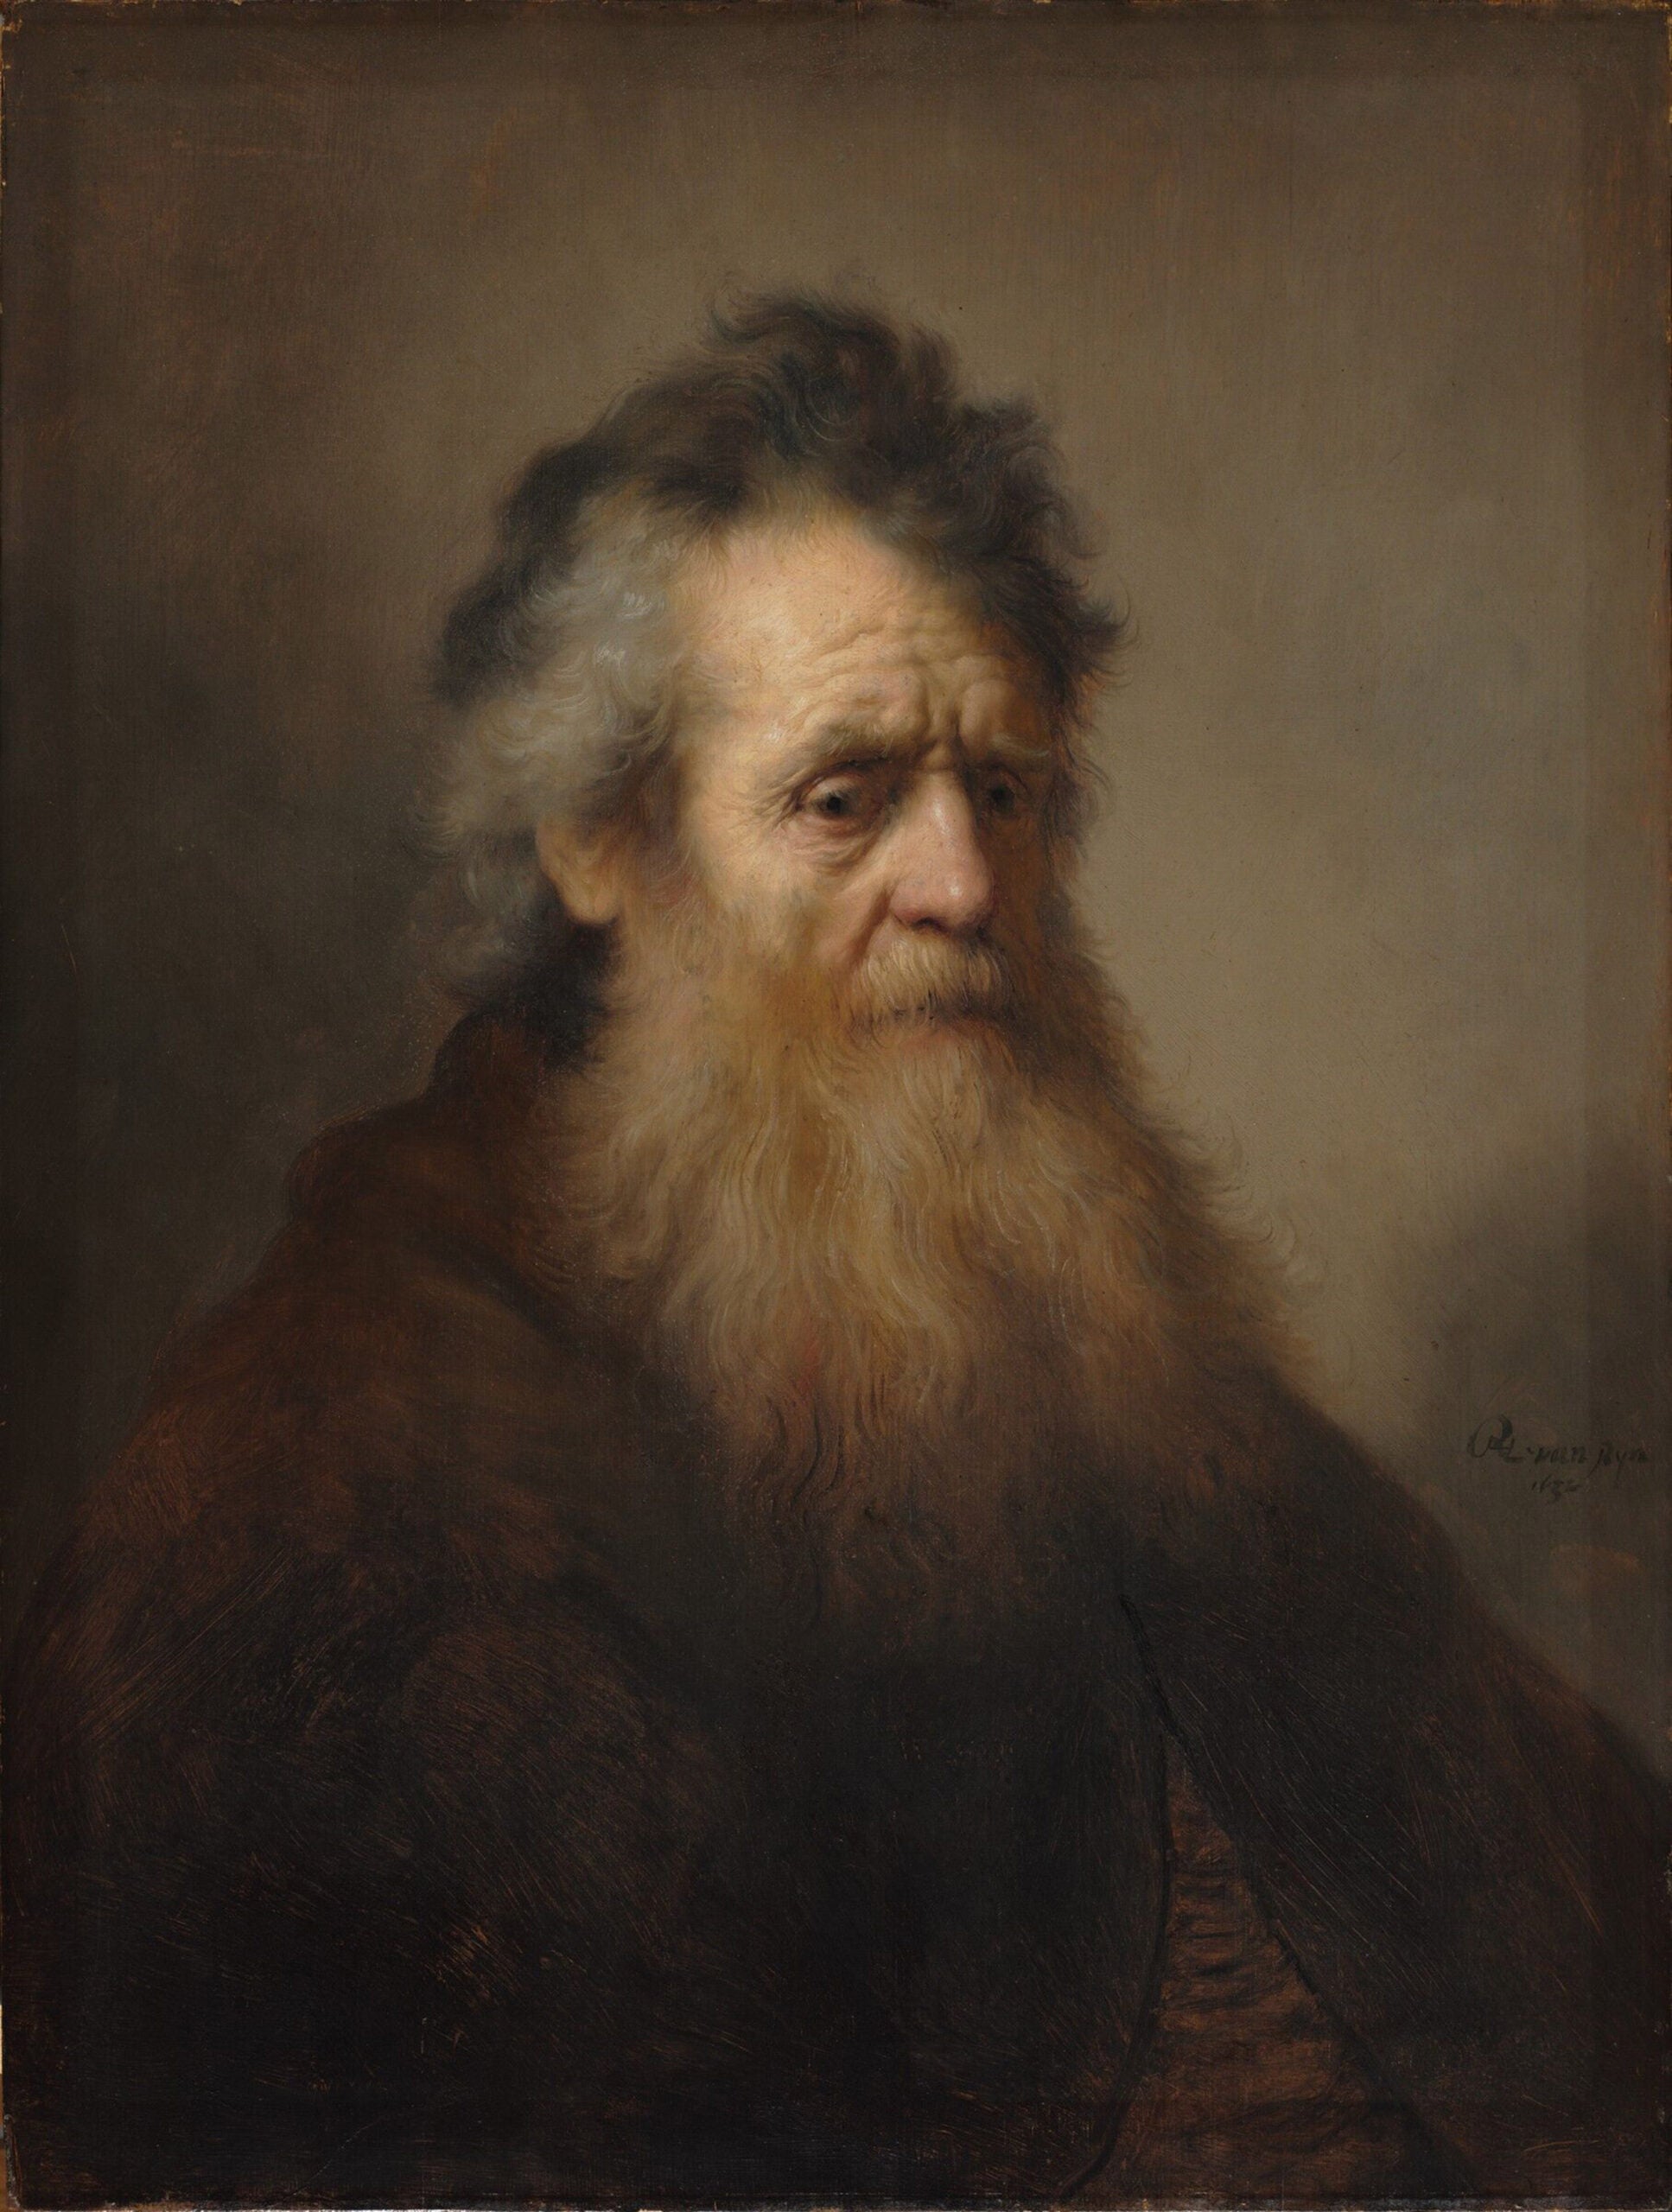 Portrait of an Old Man, 1632.